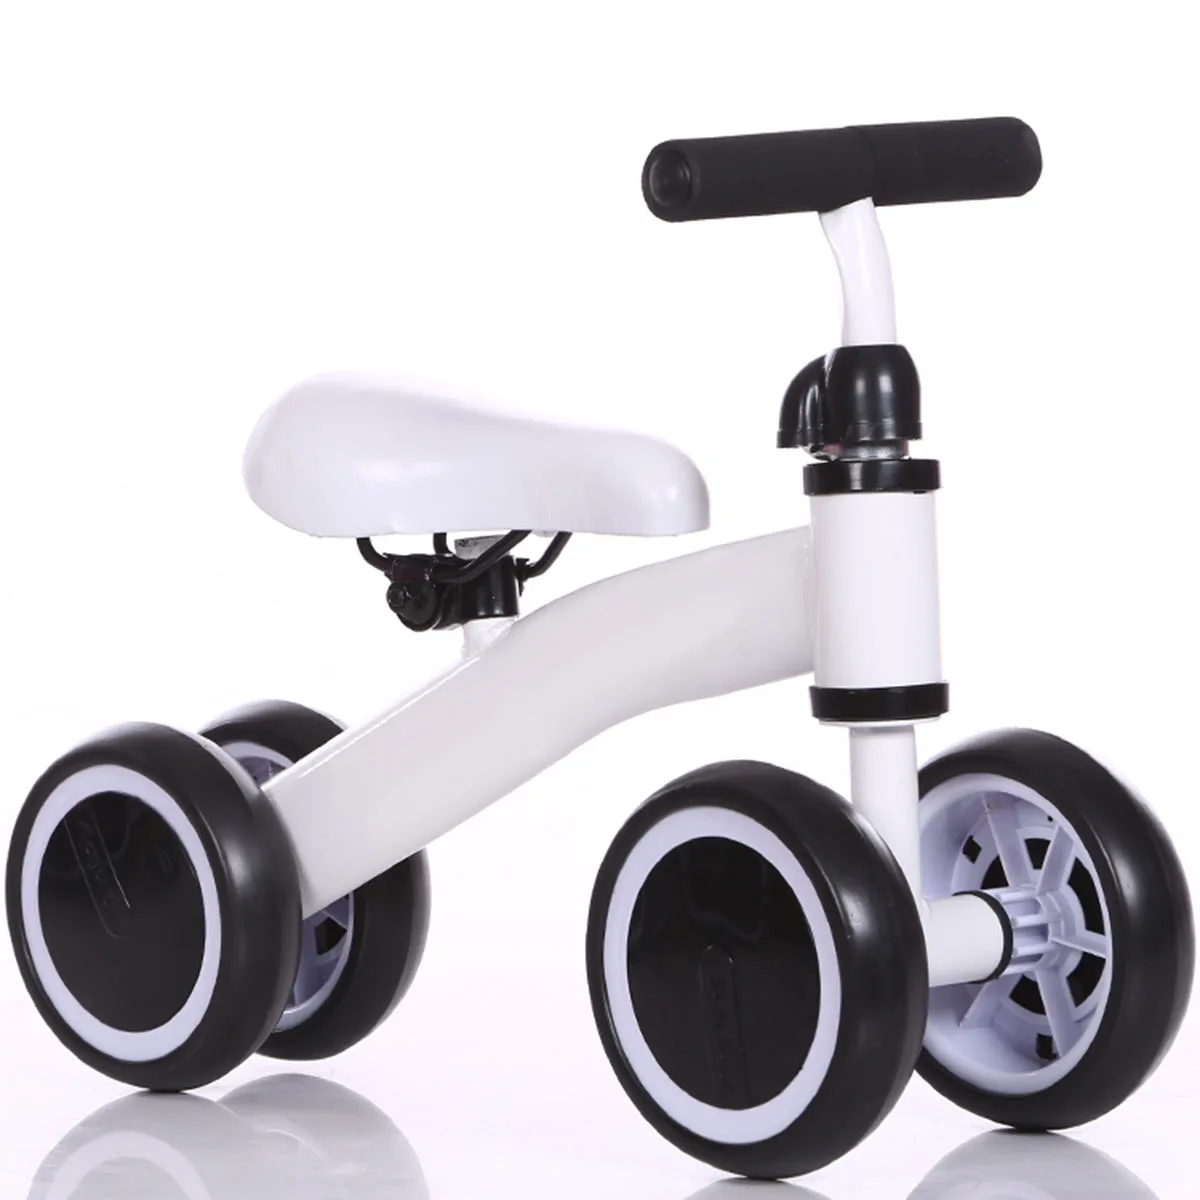 Enlarge Baby Balance Bike Learn To Walk Get Balance Sense No Foot Pedal Riding Toys for Kids Baby Toddler 1-3 years Child Tricycle Bike